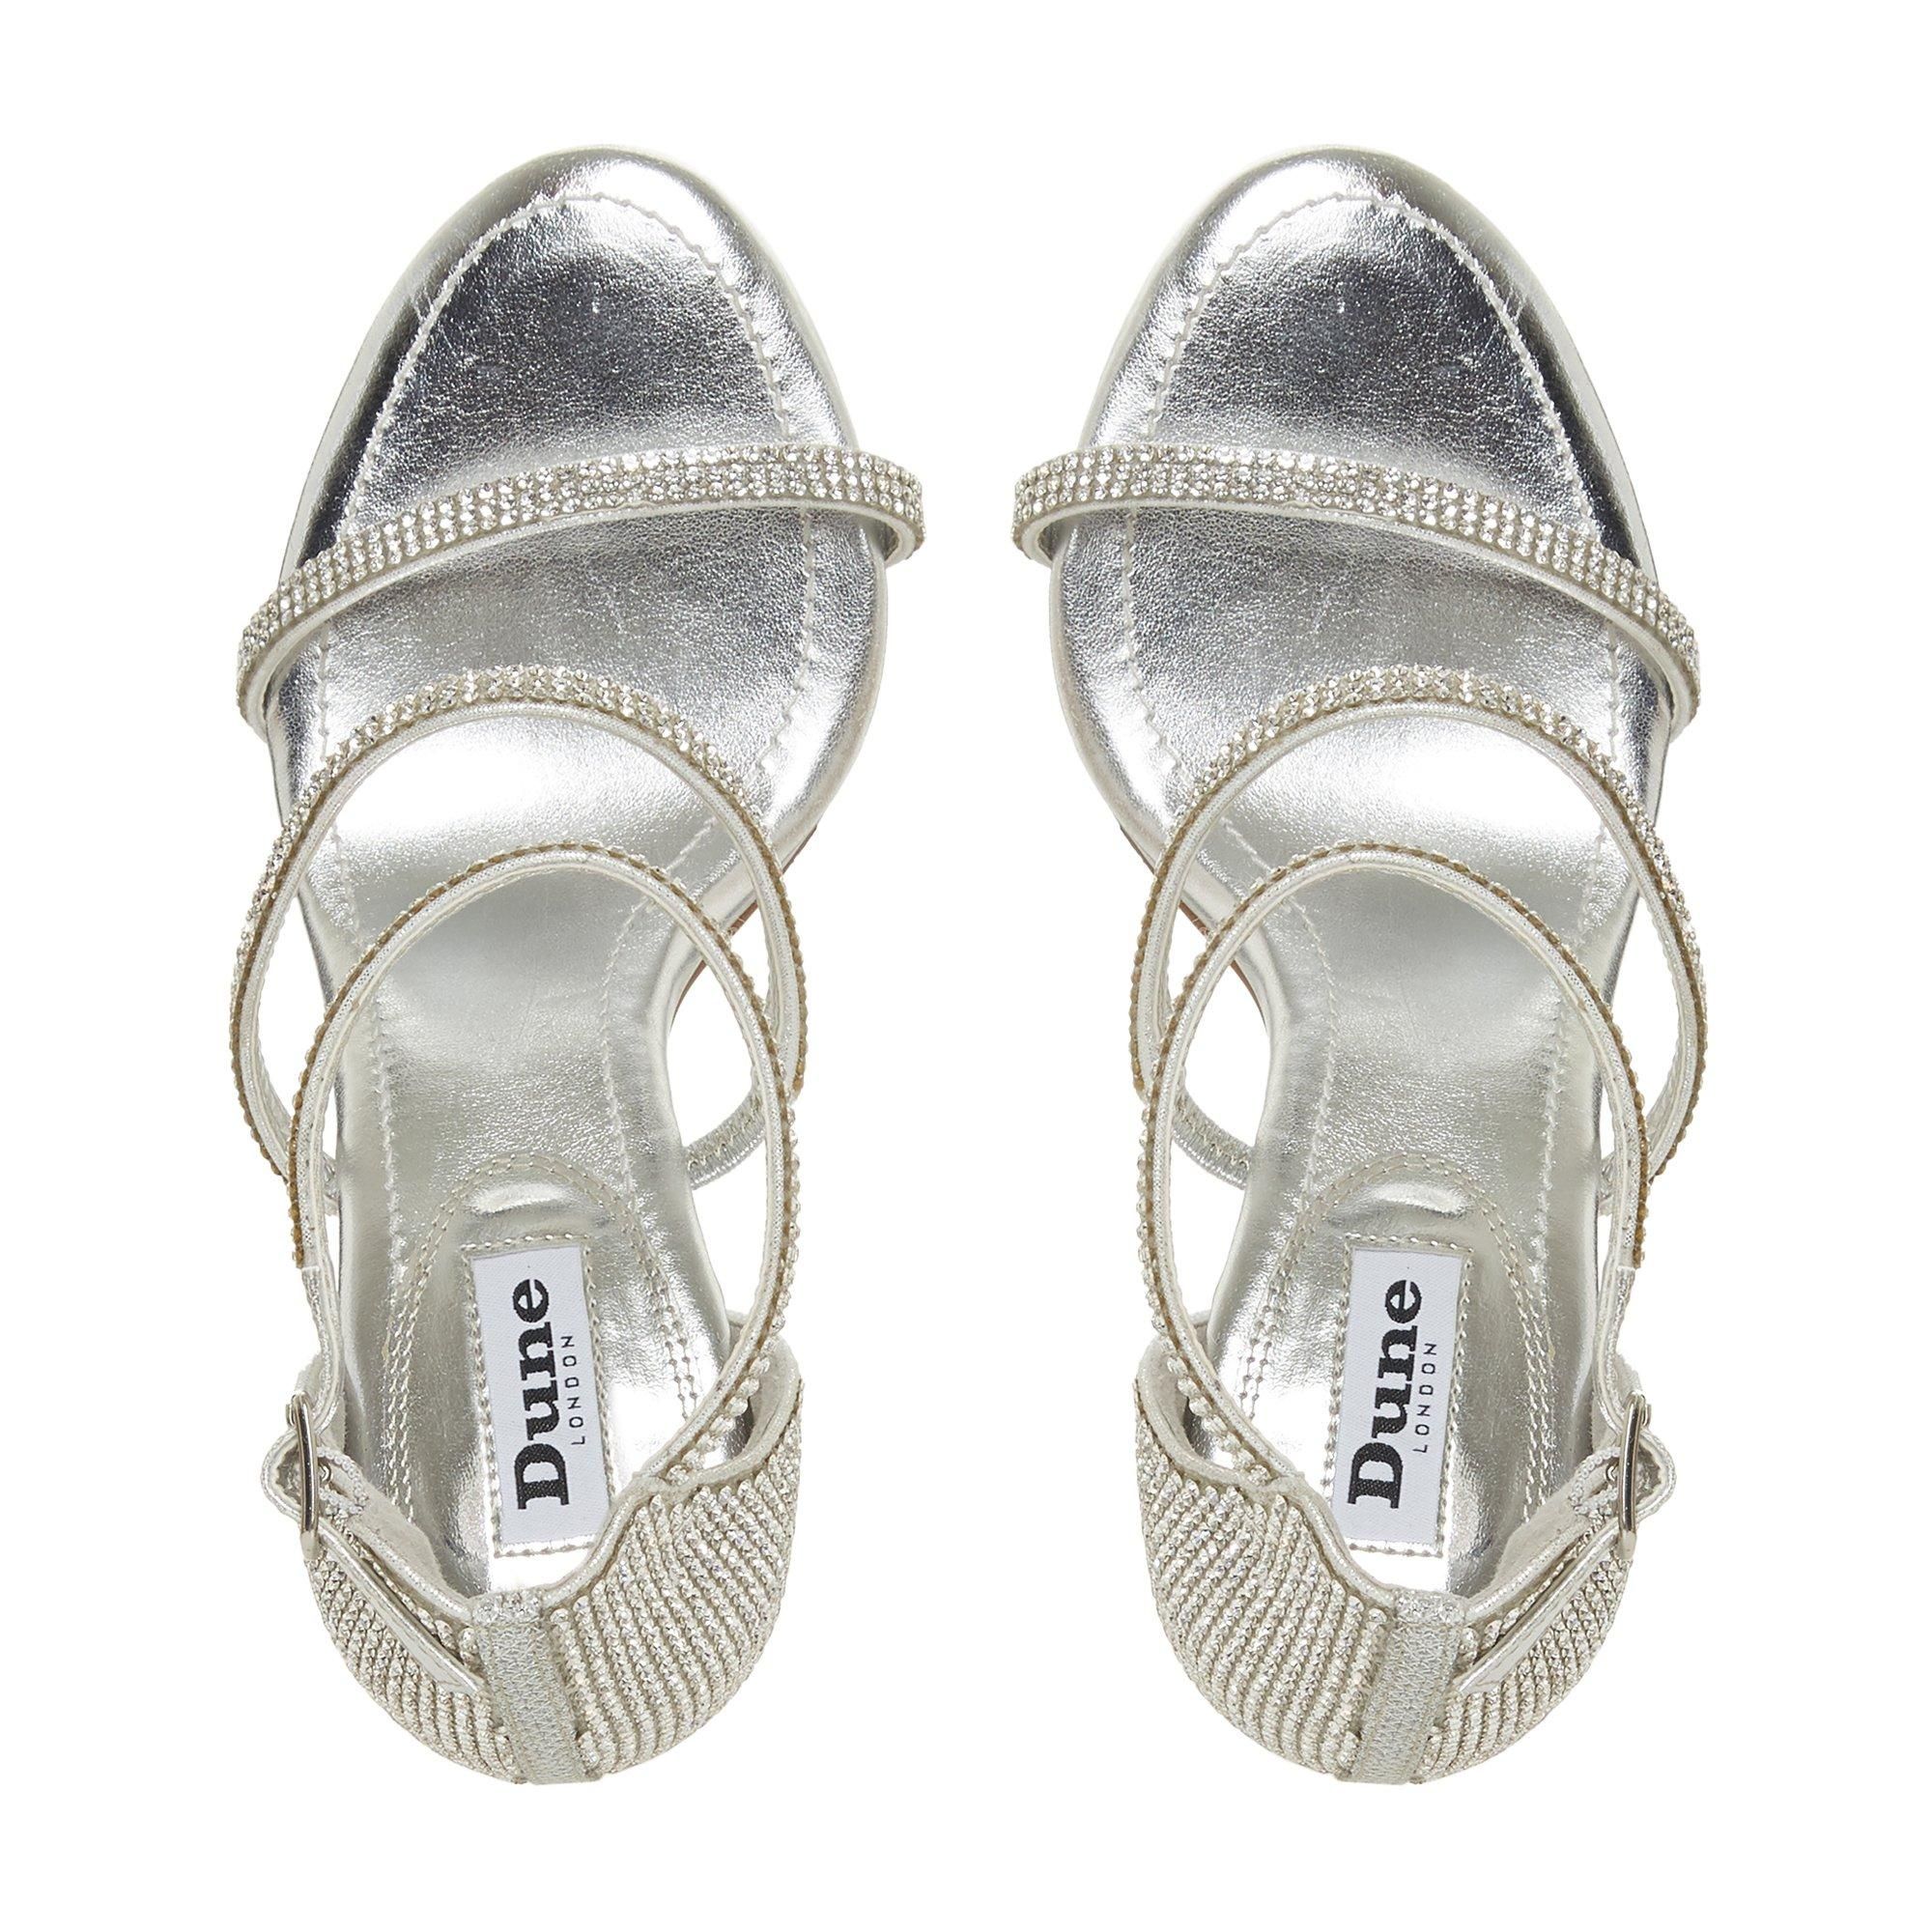 Lend a touch of sparkle to your footwear with the Maxie sandals. Adorned with all-over diamante details and resting on a high stiletto heel. It features two thin straps across the foot and a buckled ankle strap.